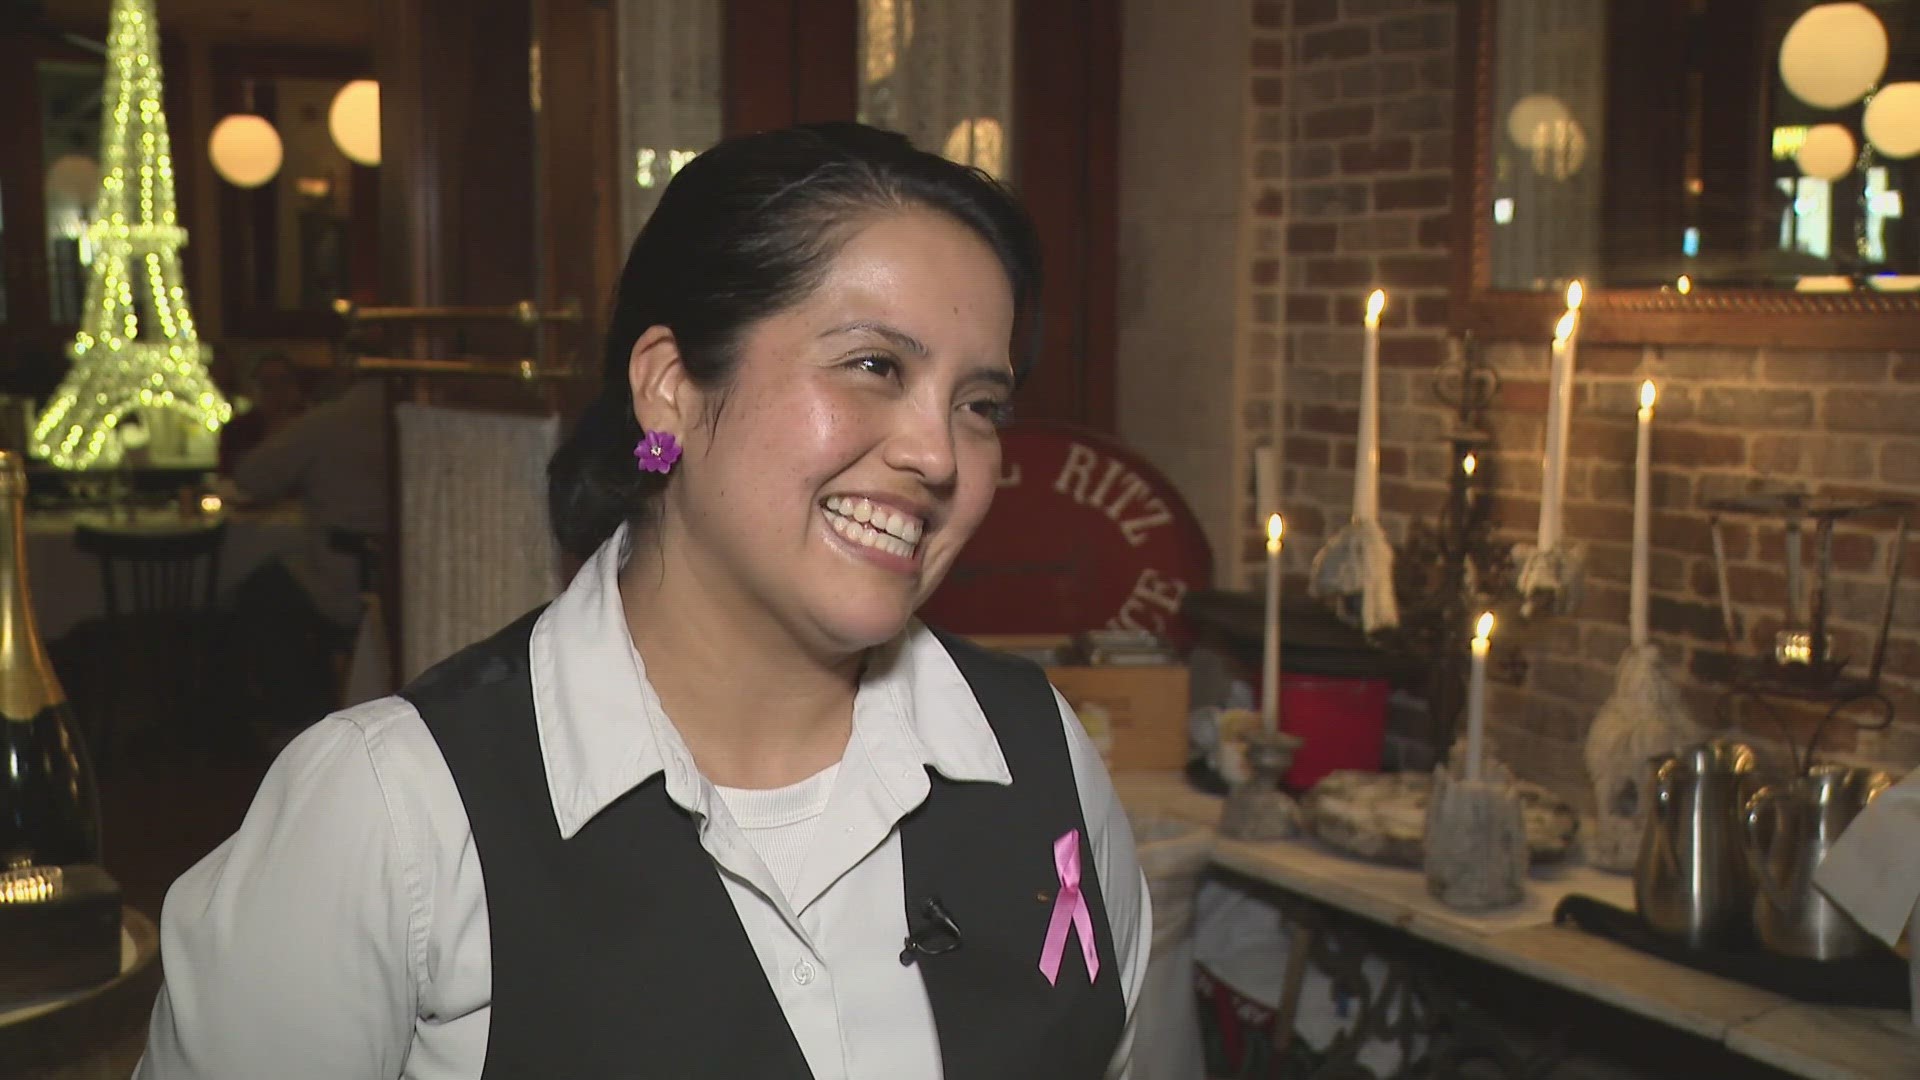 12News is proud to help you celebrate some of the most deserving servers around the Valley.